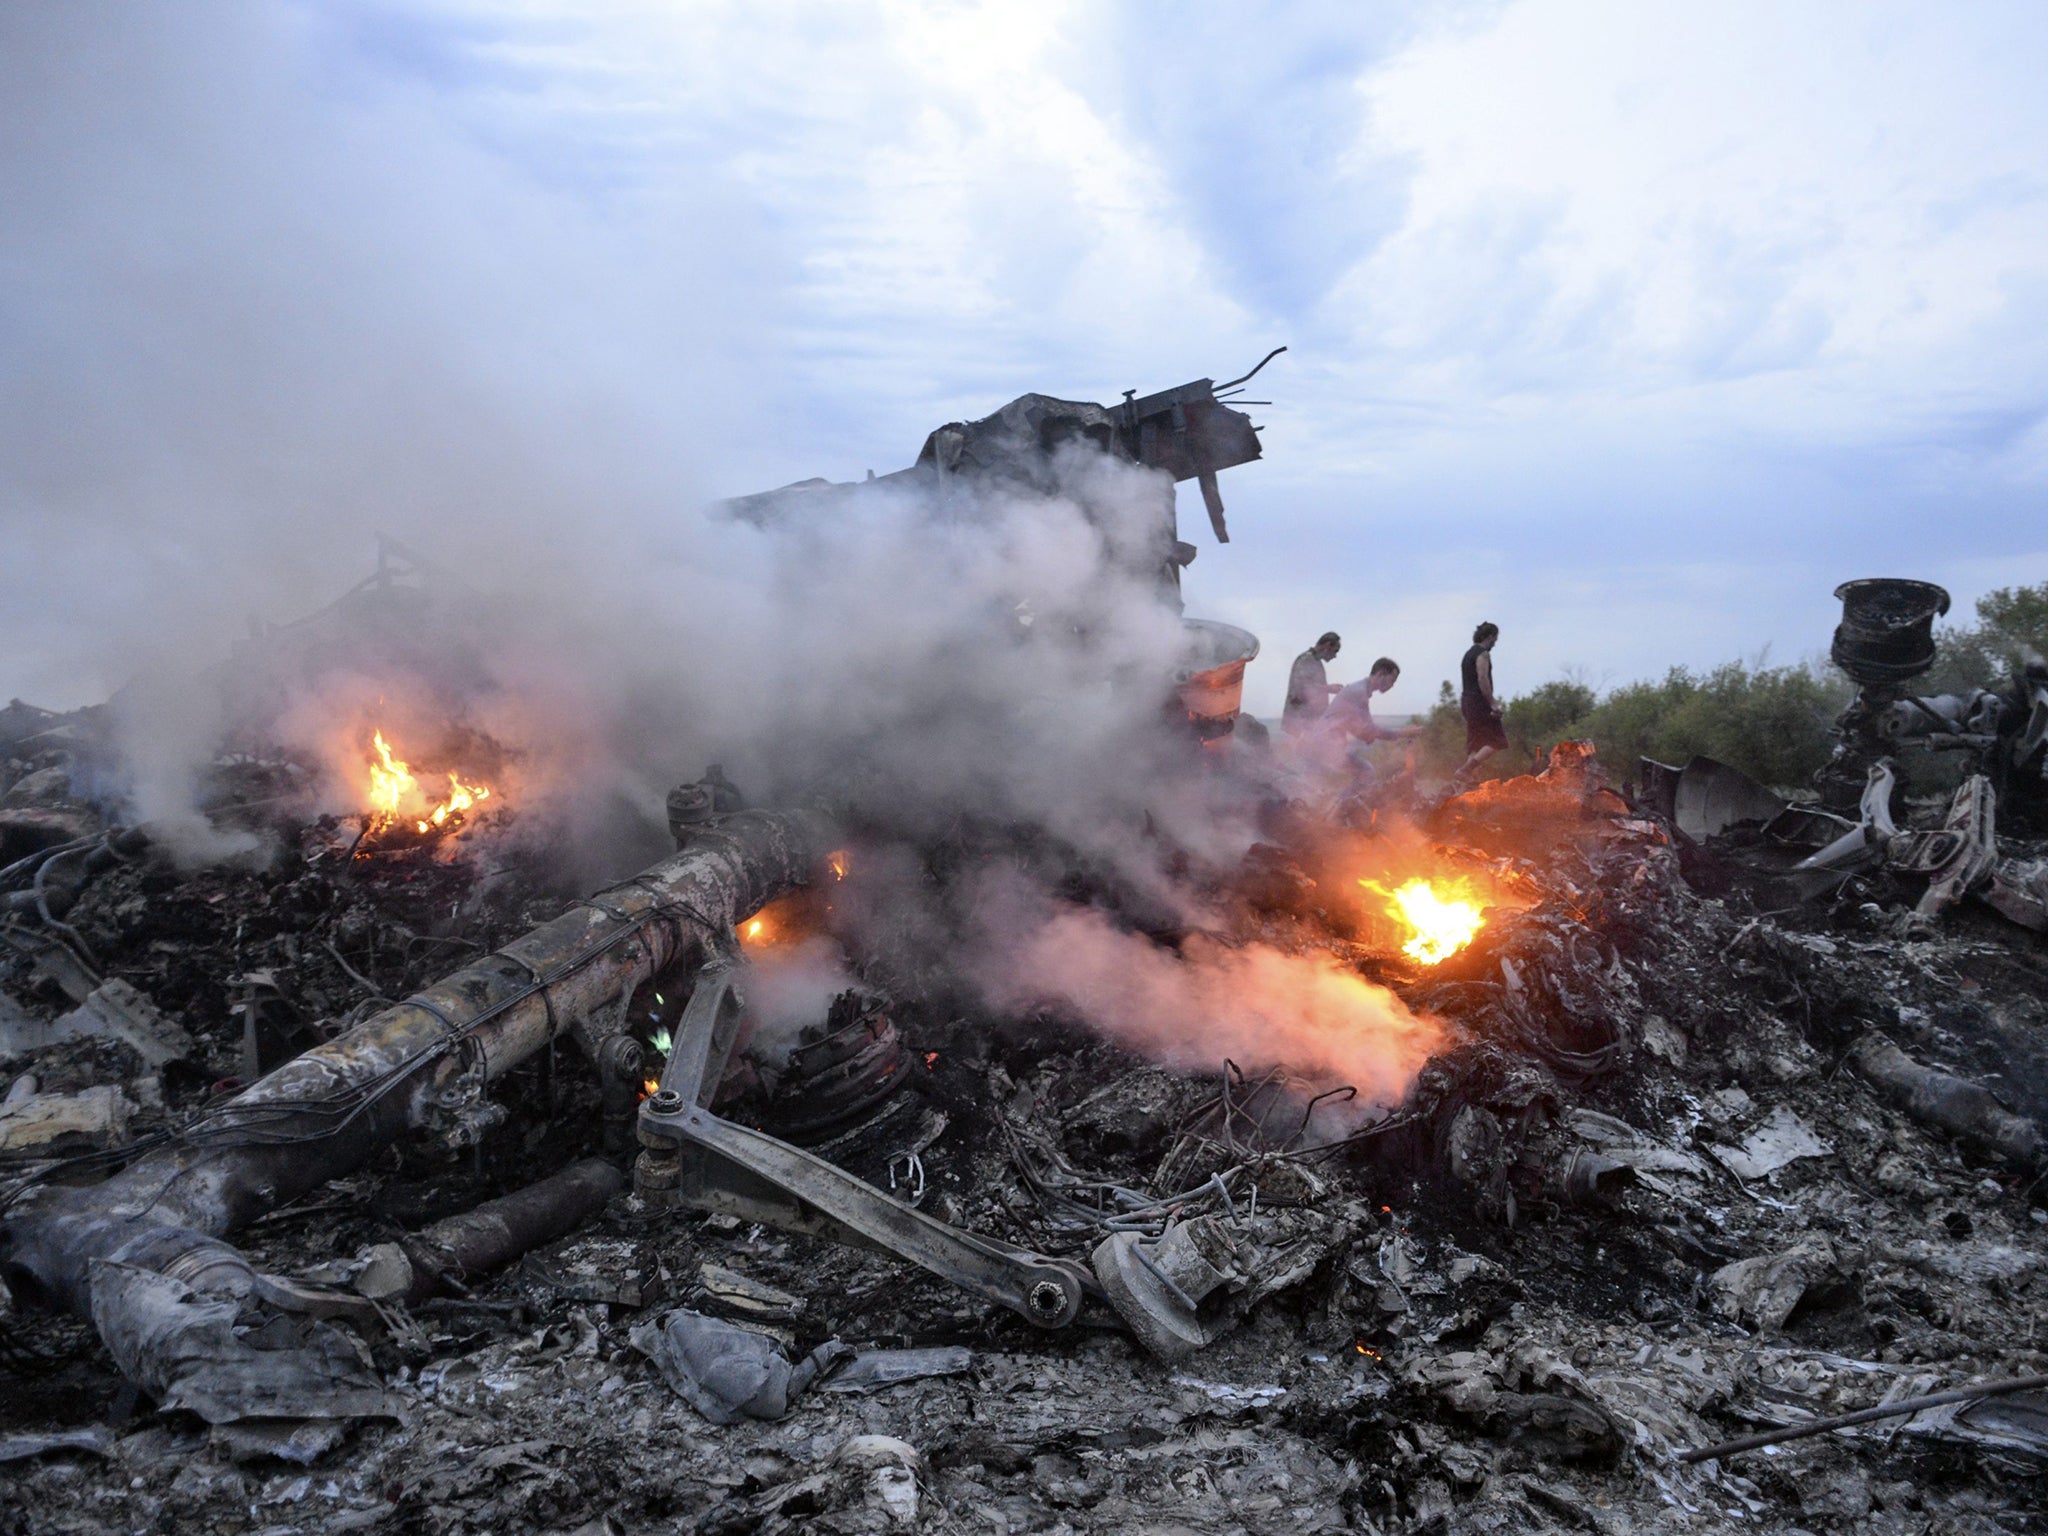 Debris of the Boeing 777, Malaysia Arilines flight MH17, which crashed during flying over the eastern Ukraine region near Donetsk